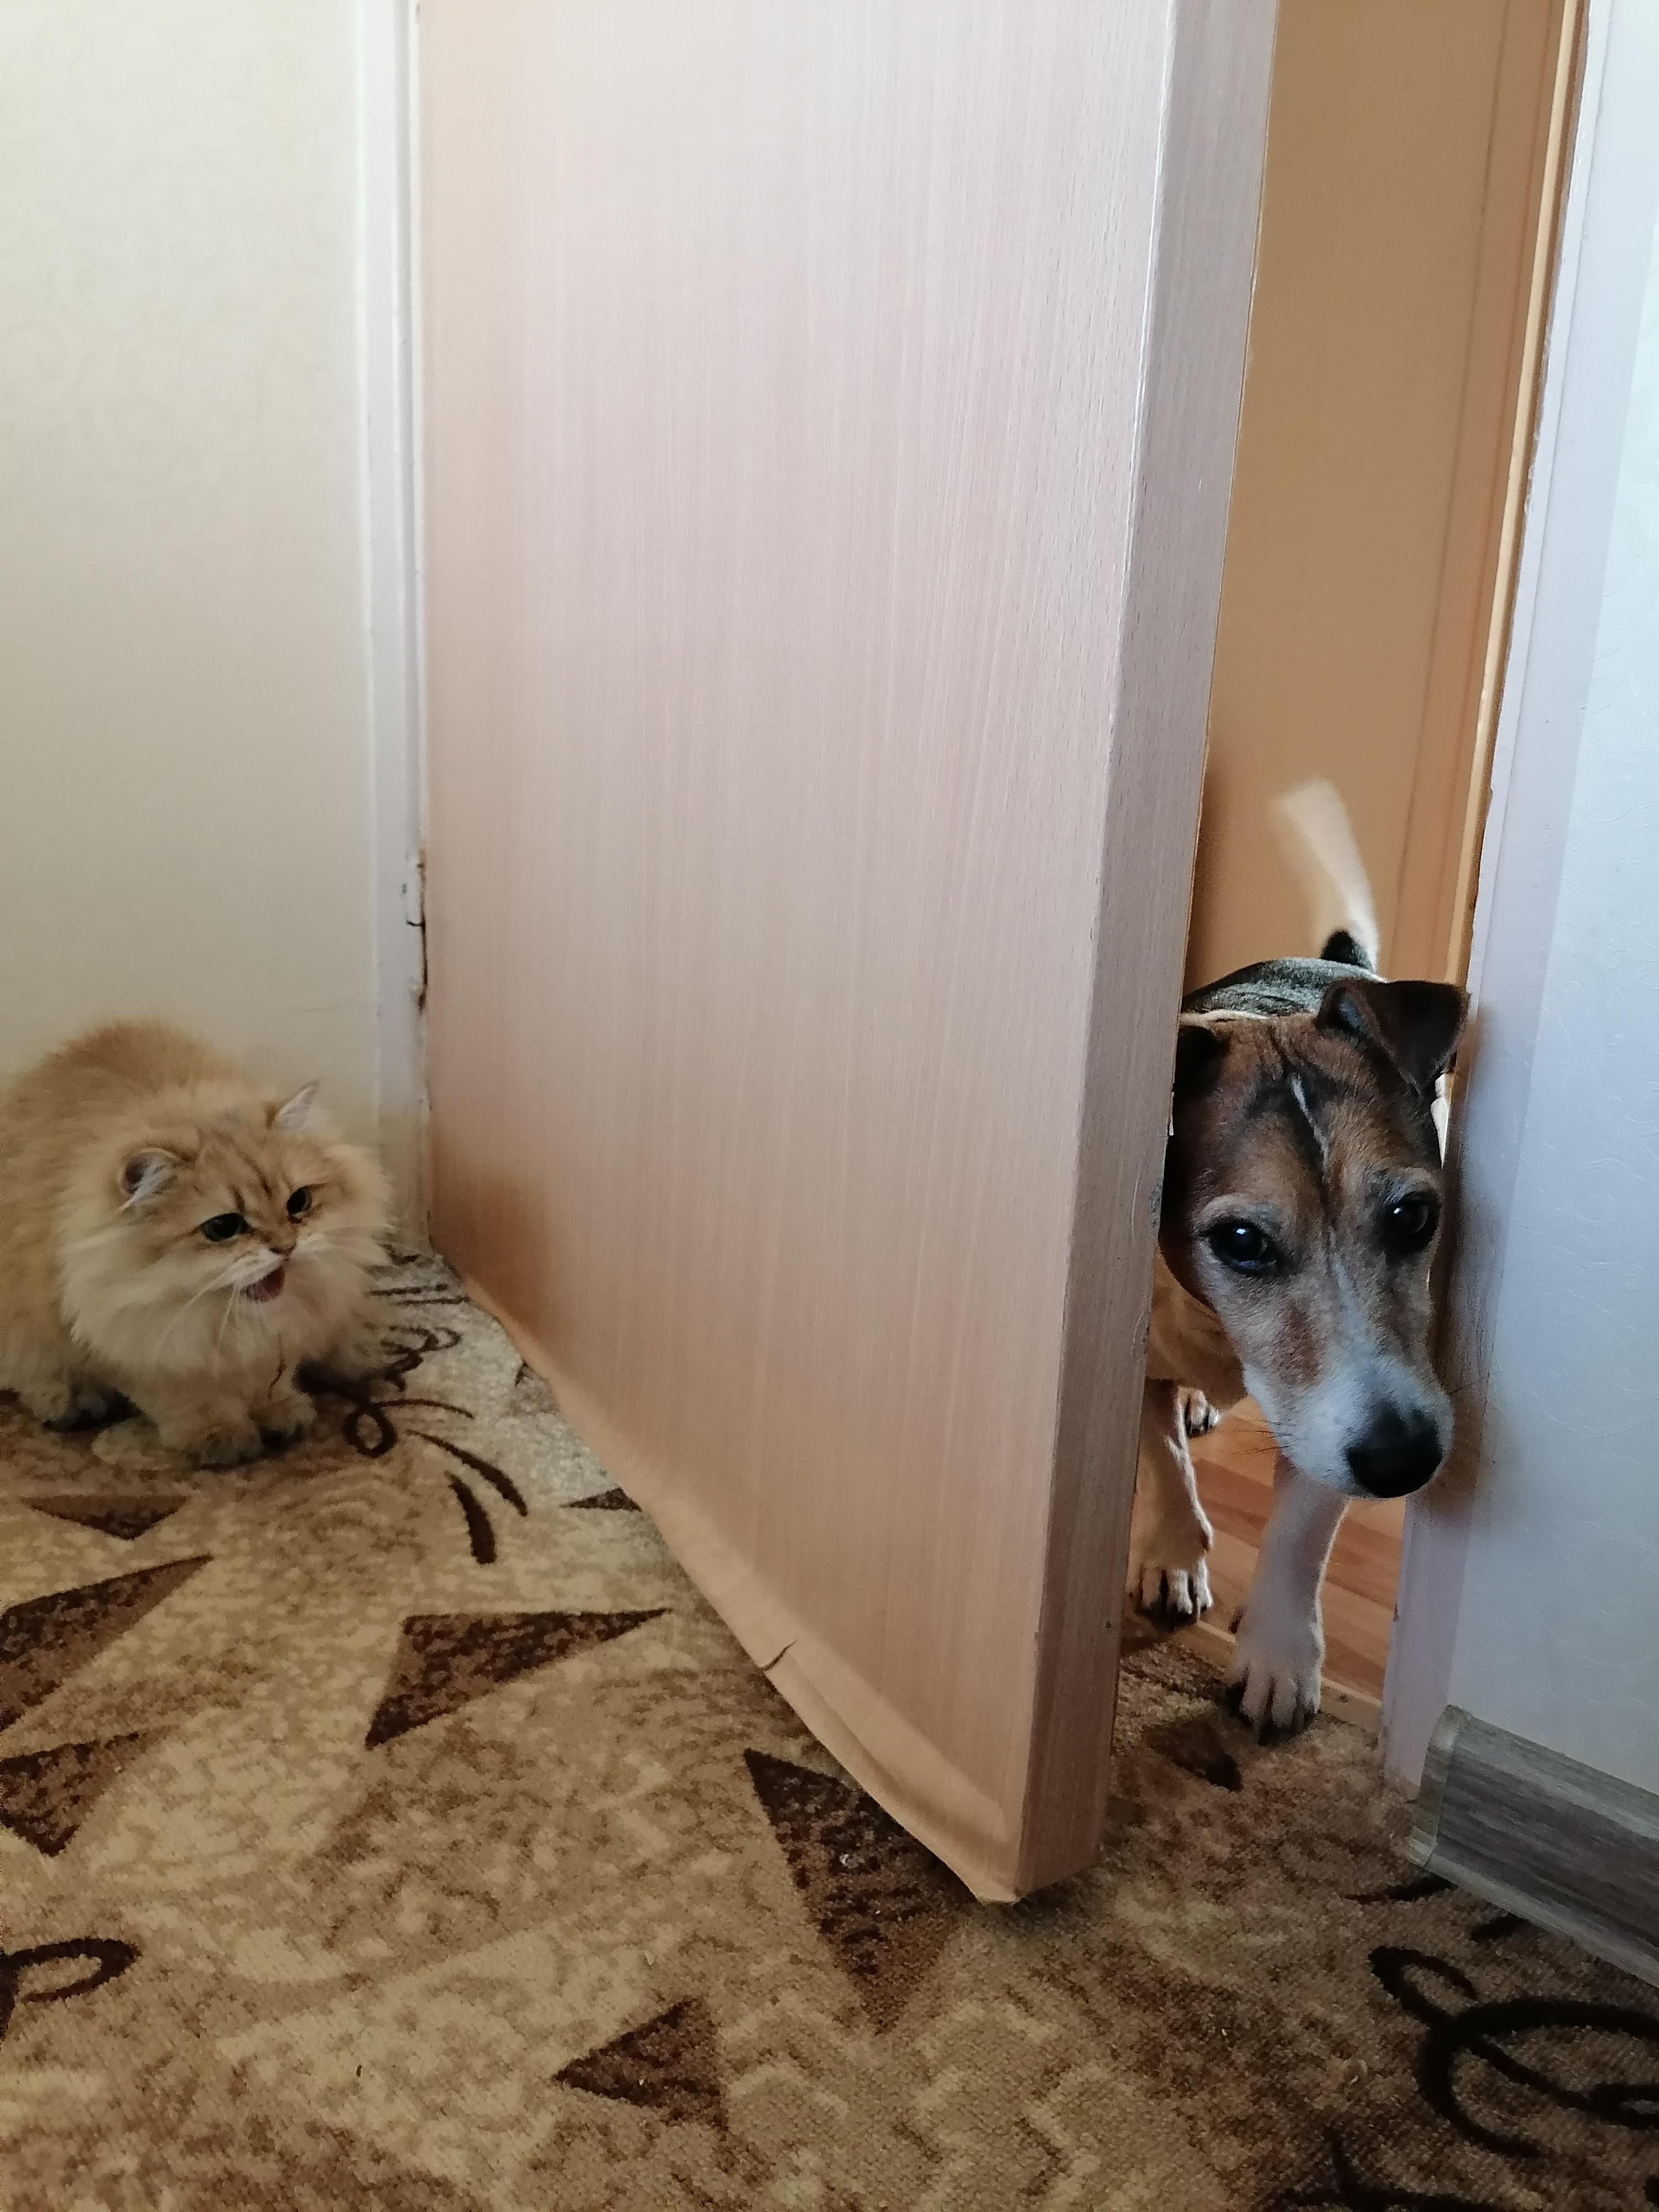 My friend’s cat is definitely not happy with this shining dog’s visit